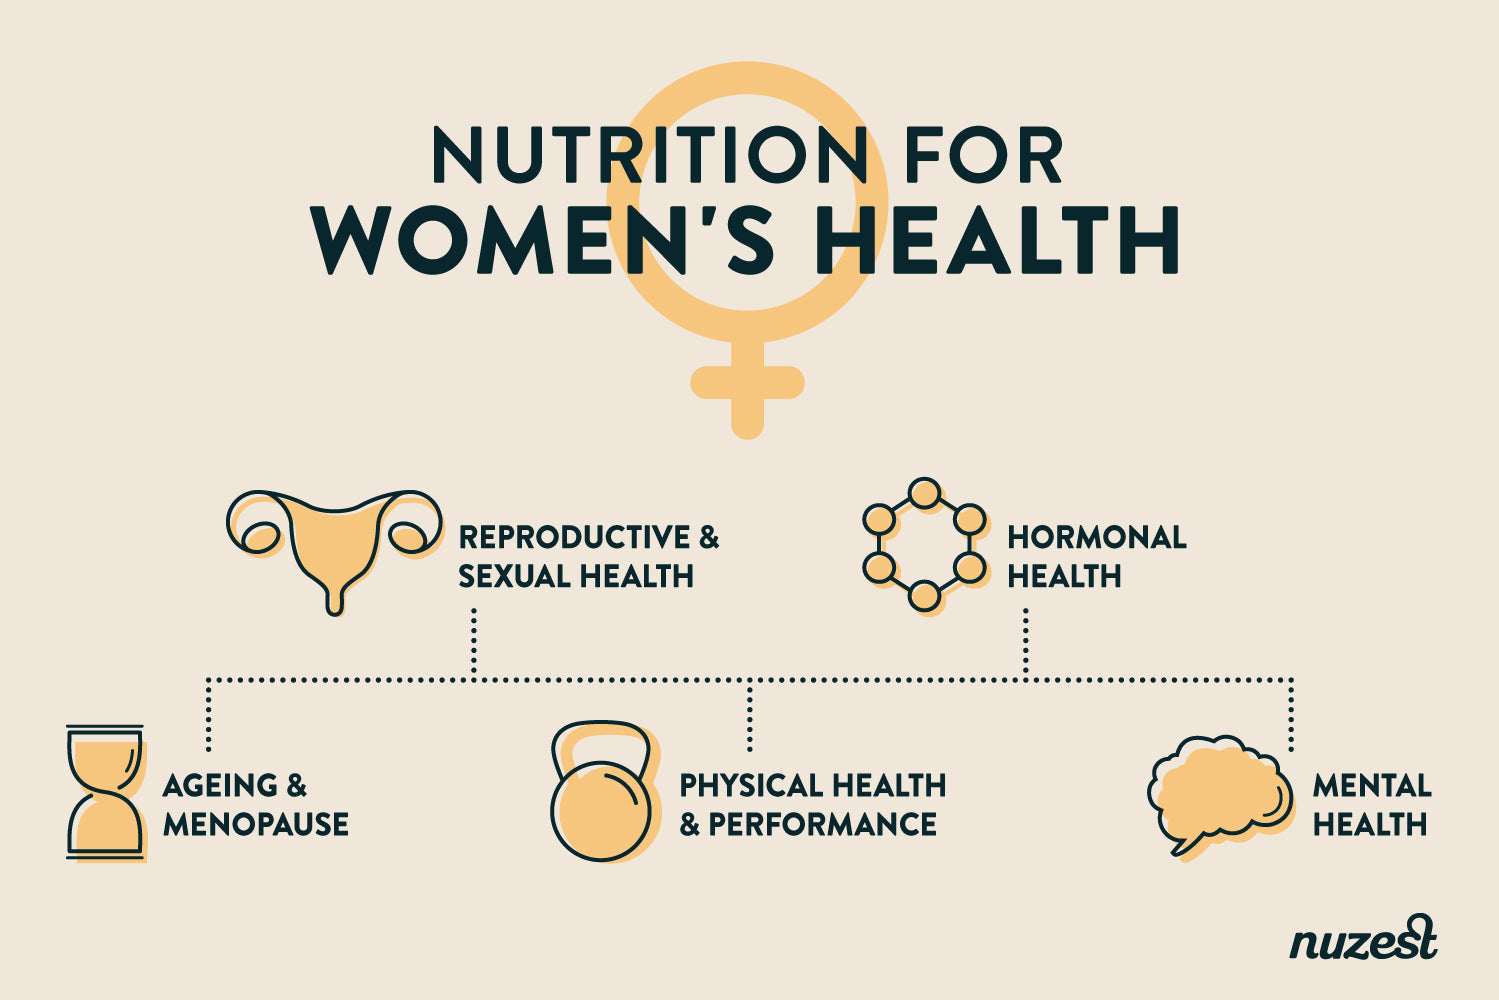 Nutrition for Women's Health